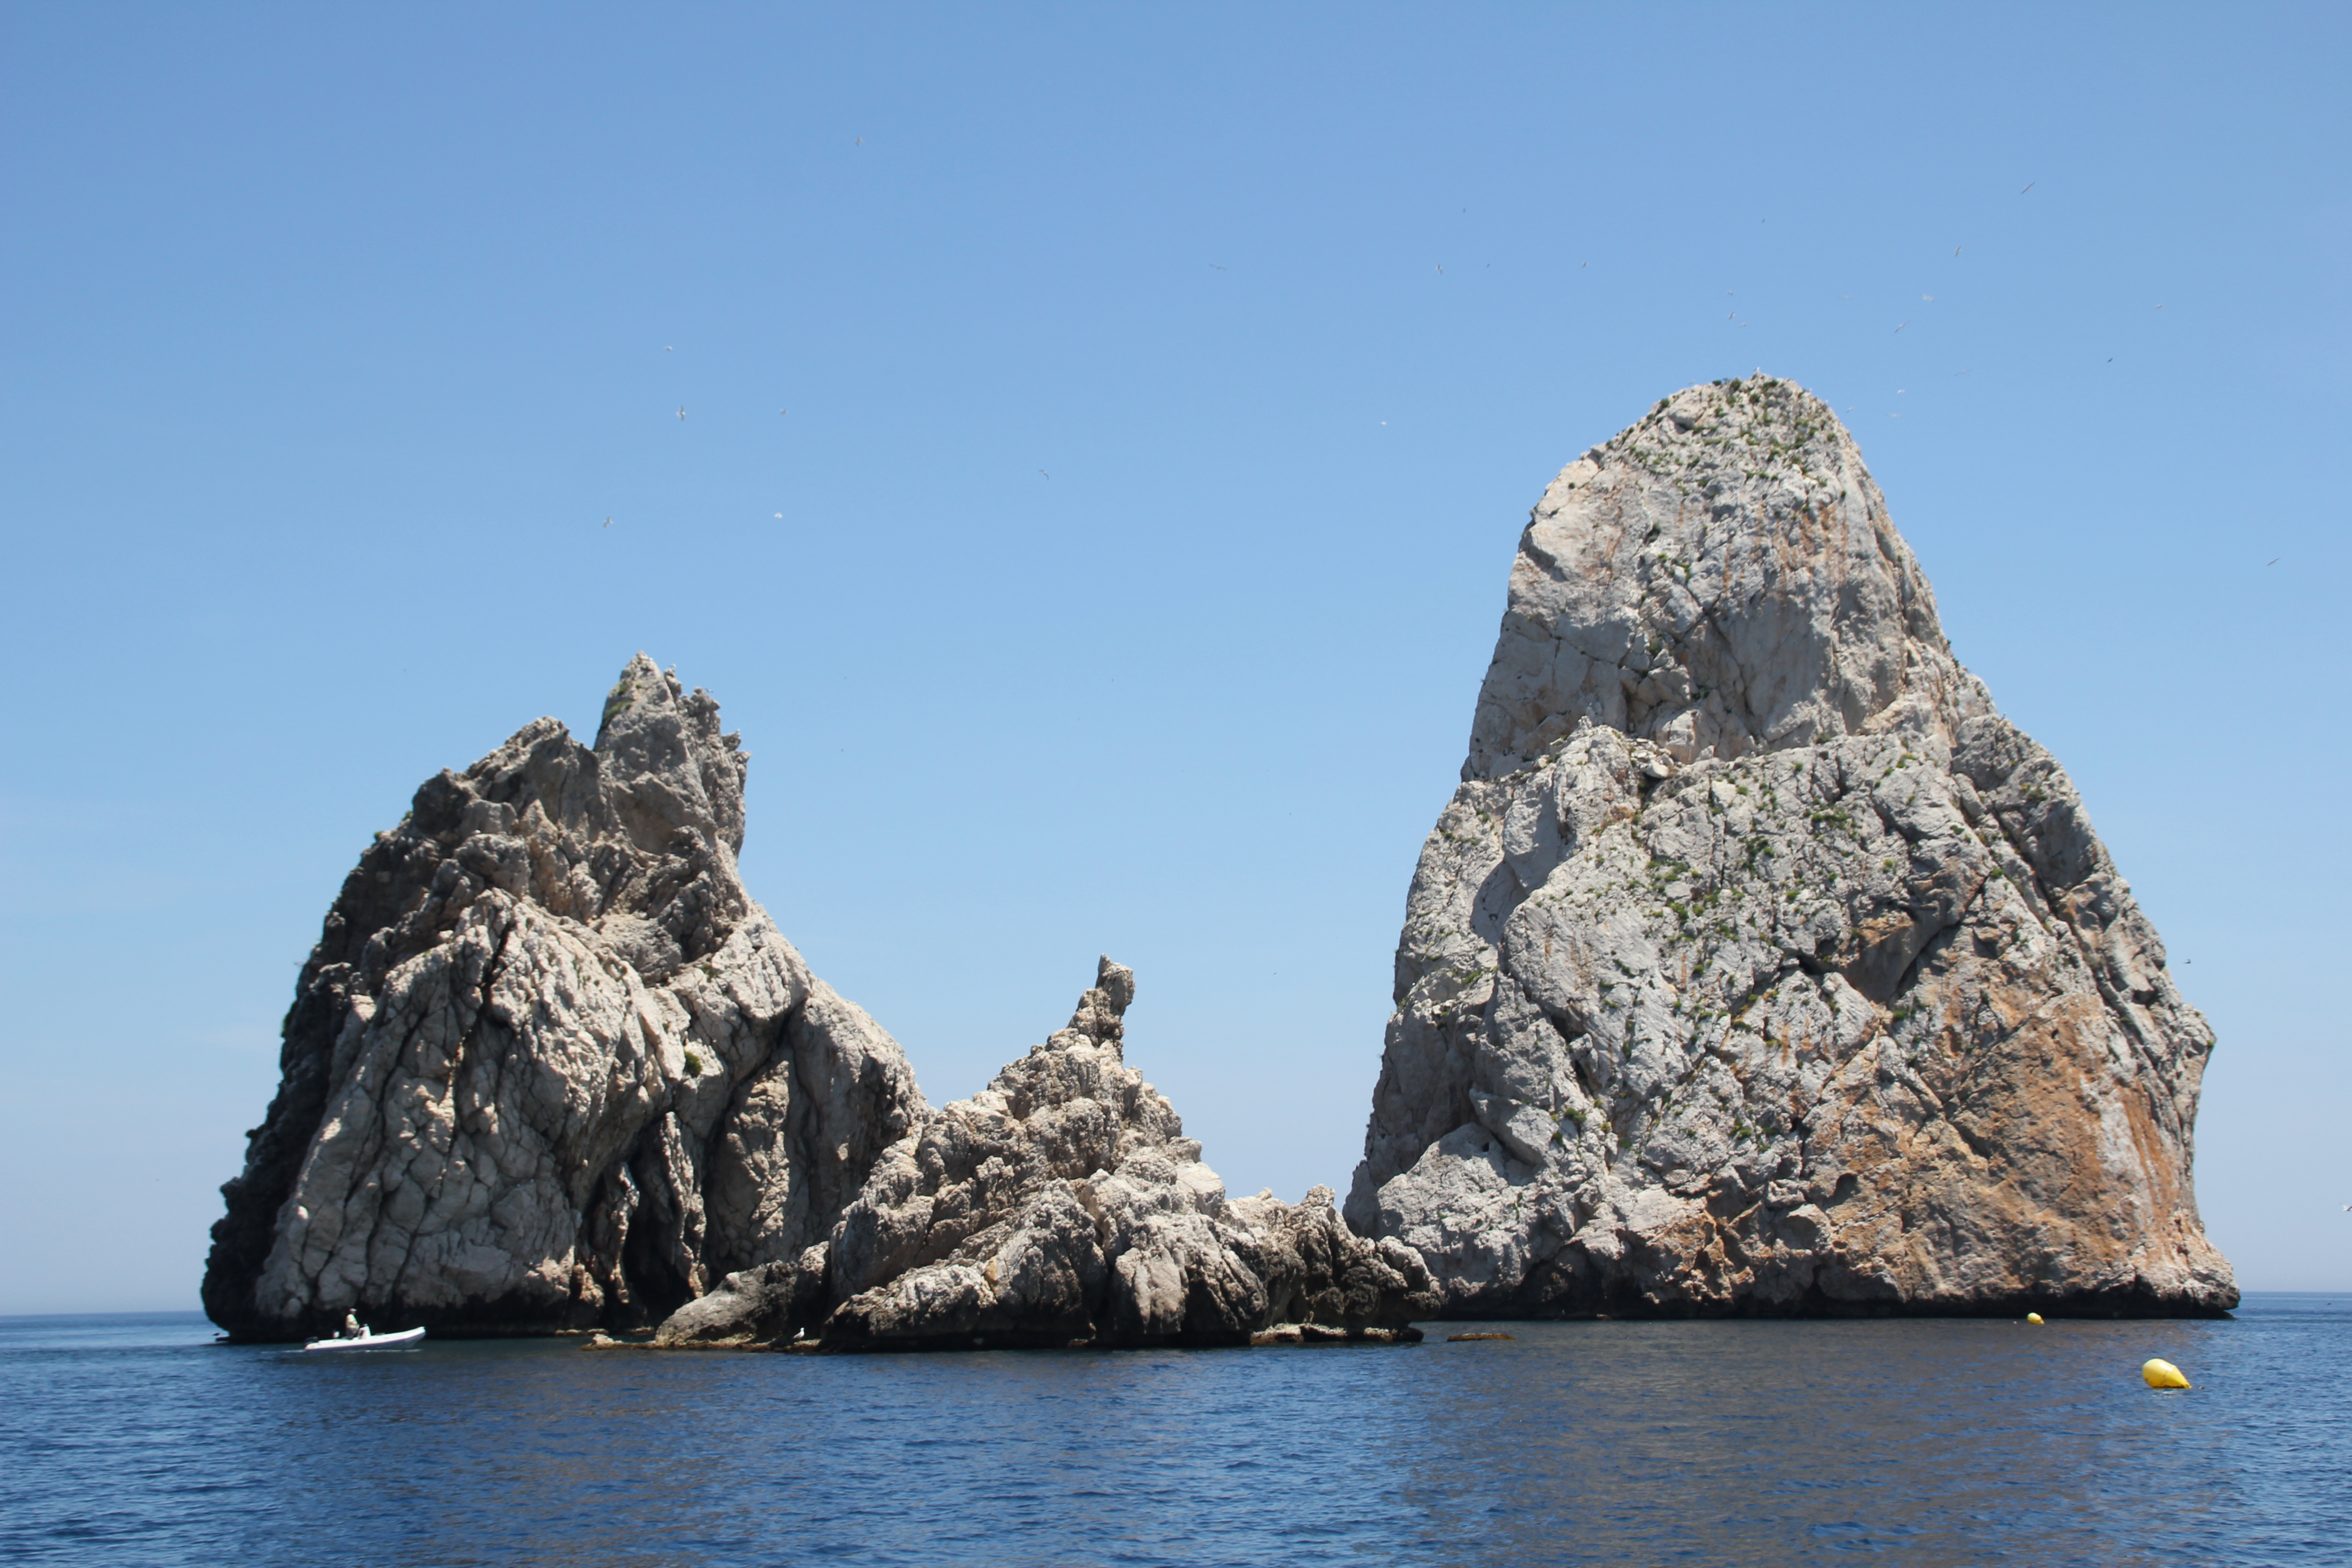 Islands, islets and other rock formations